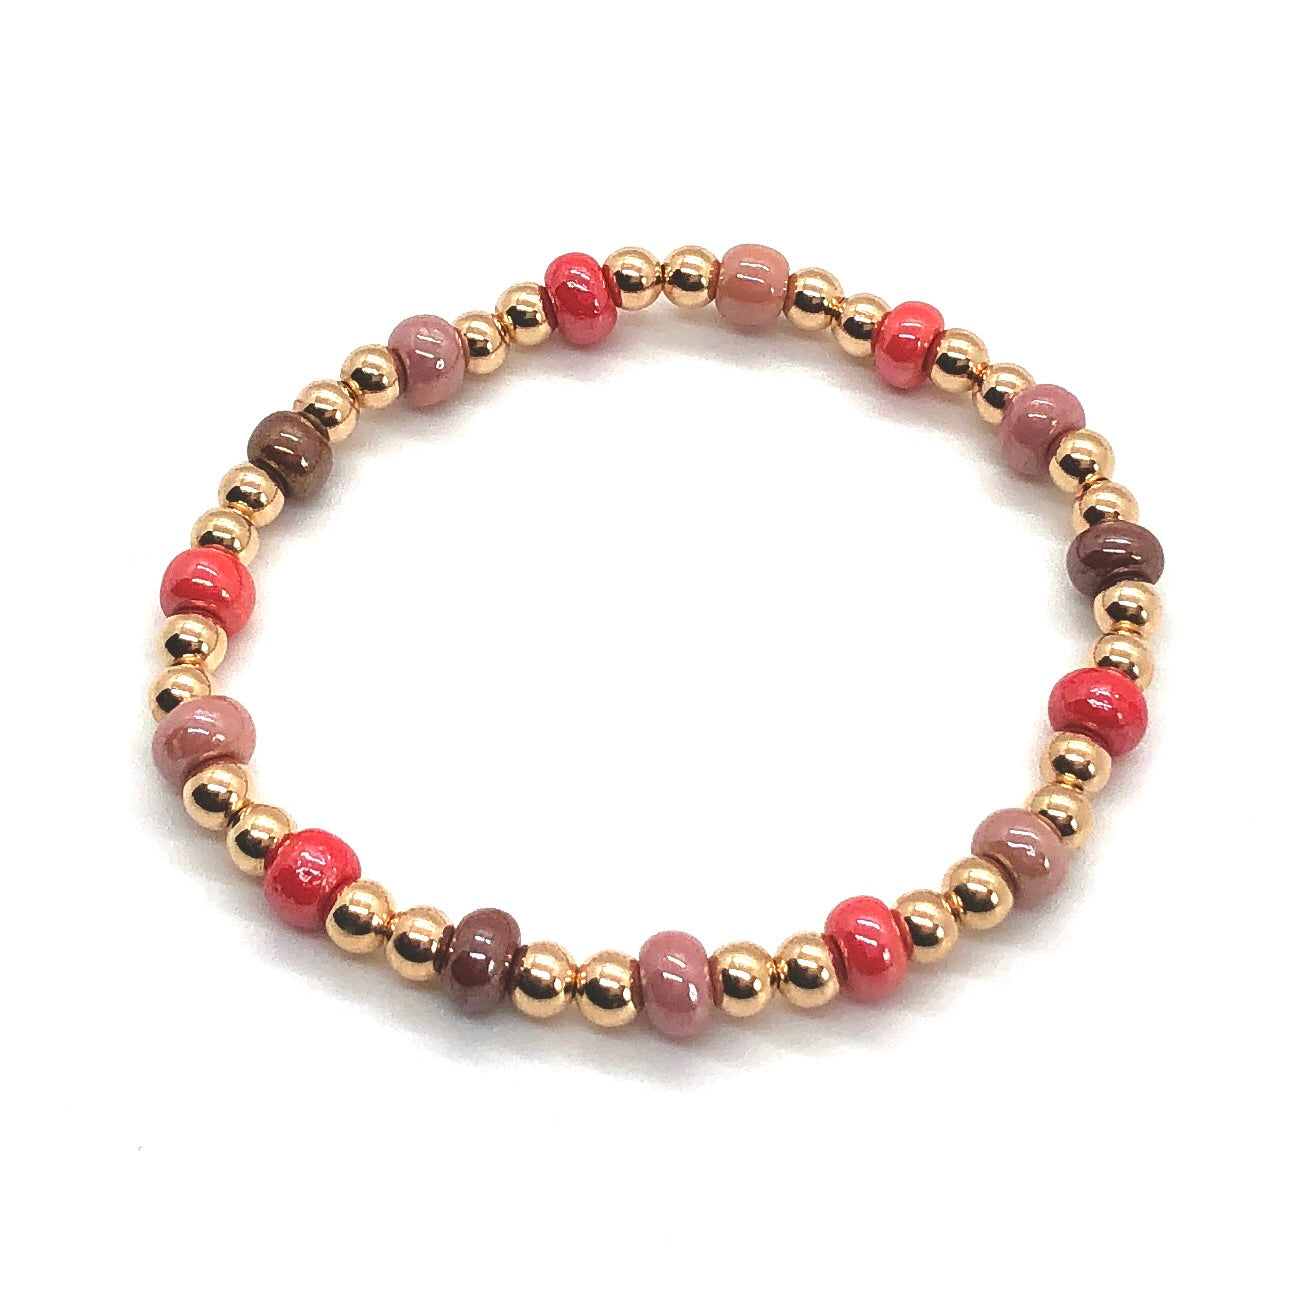 Rose gold bracelet with 4mm balls and red and pink beads on stretch cord.